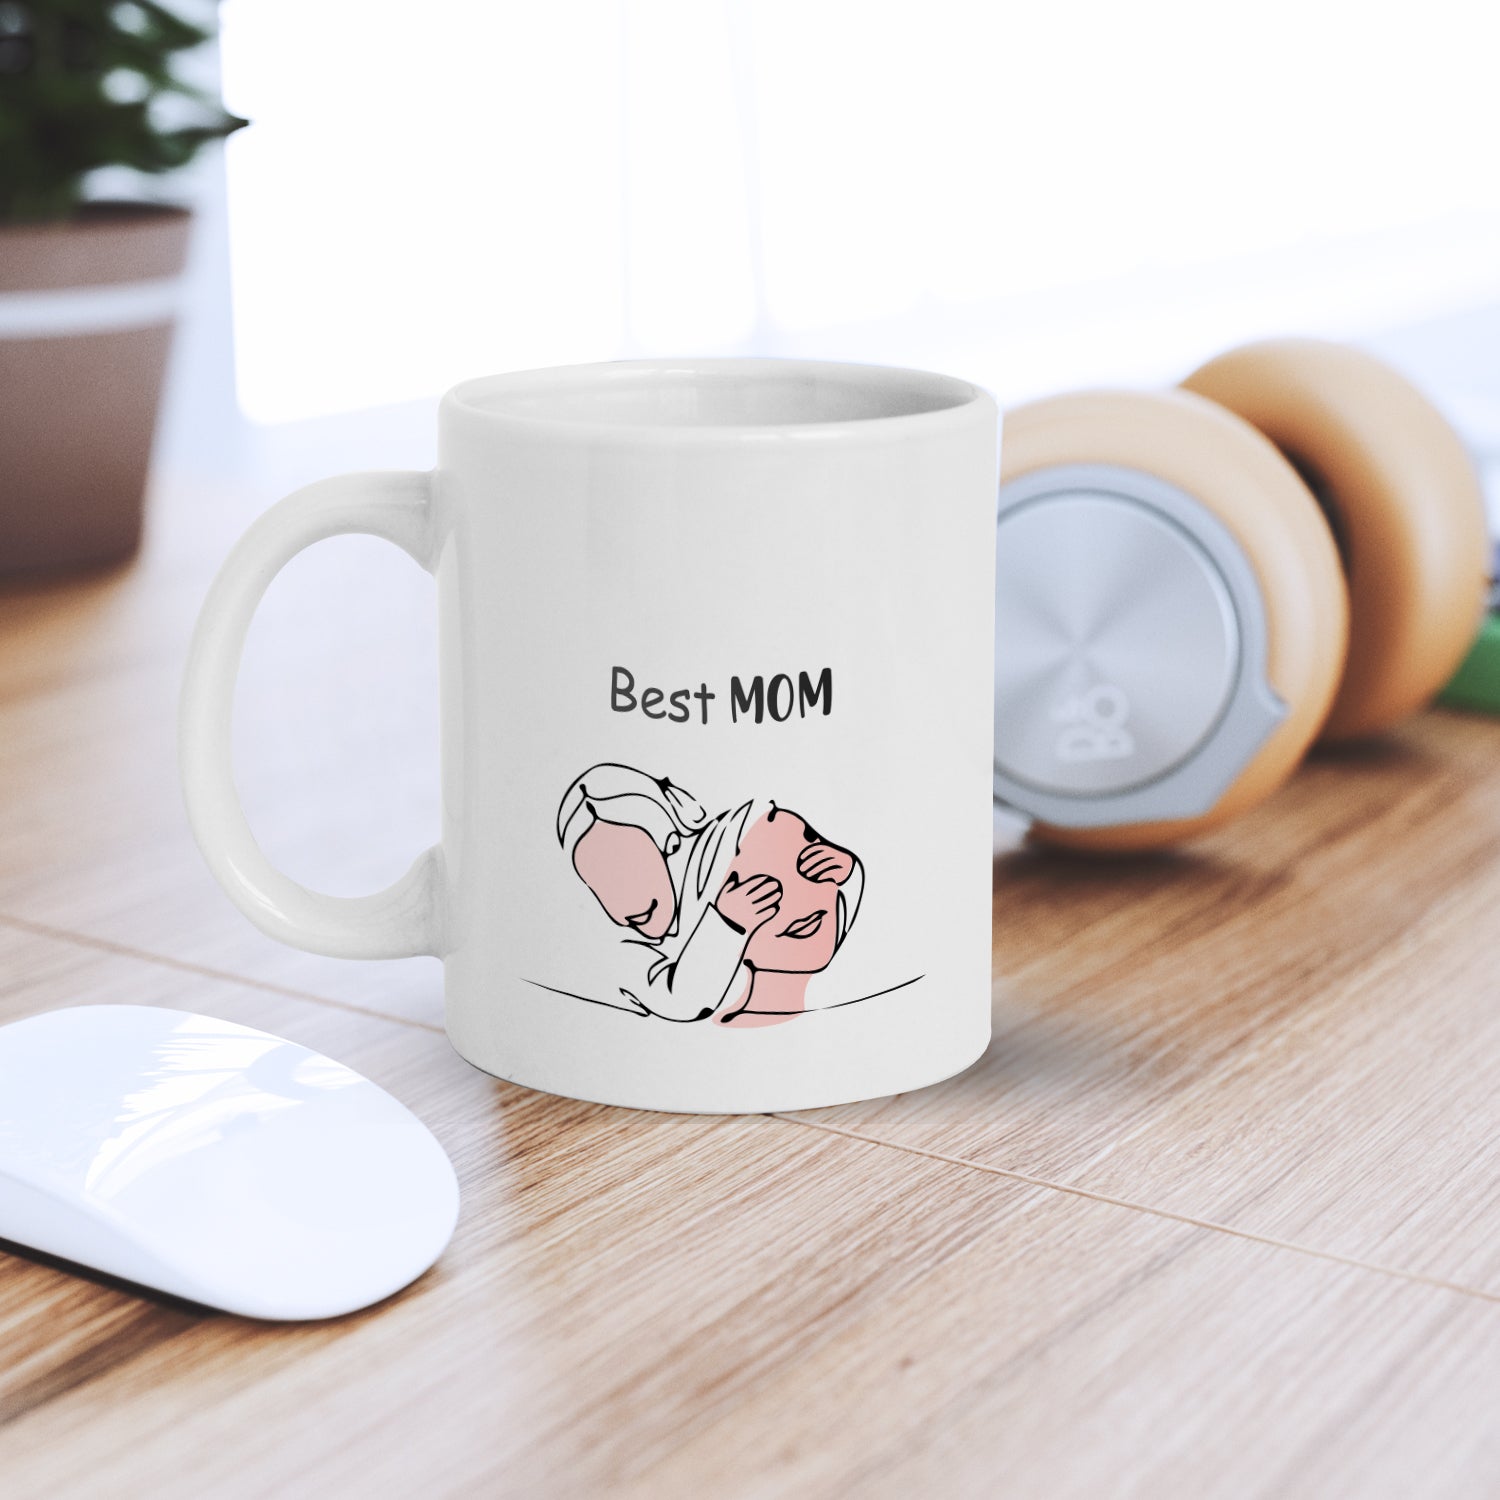 "Best MOM" Mother's Day theme Ceramic Coffee Mugs